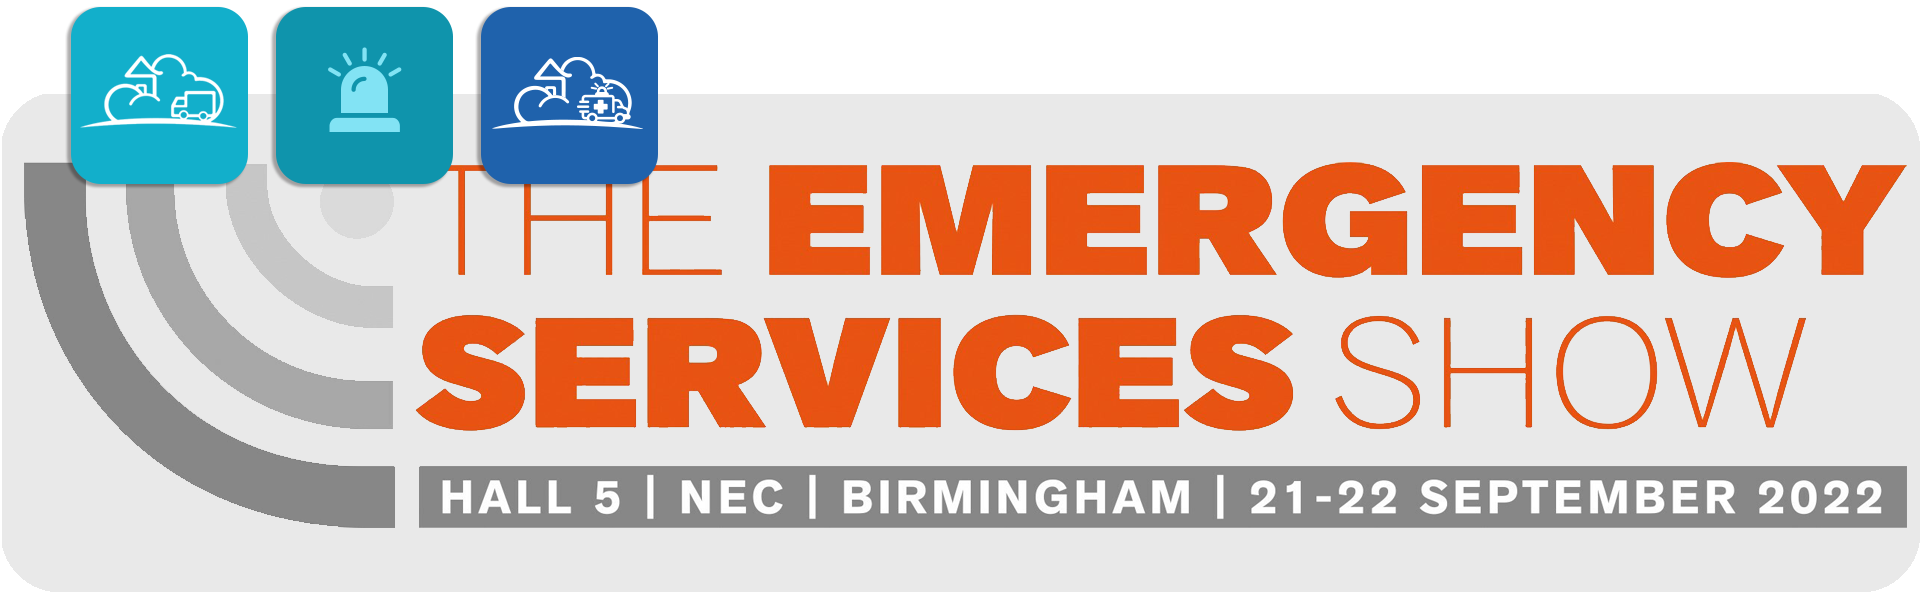 emergency services show banner